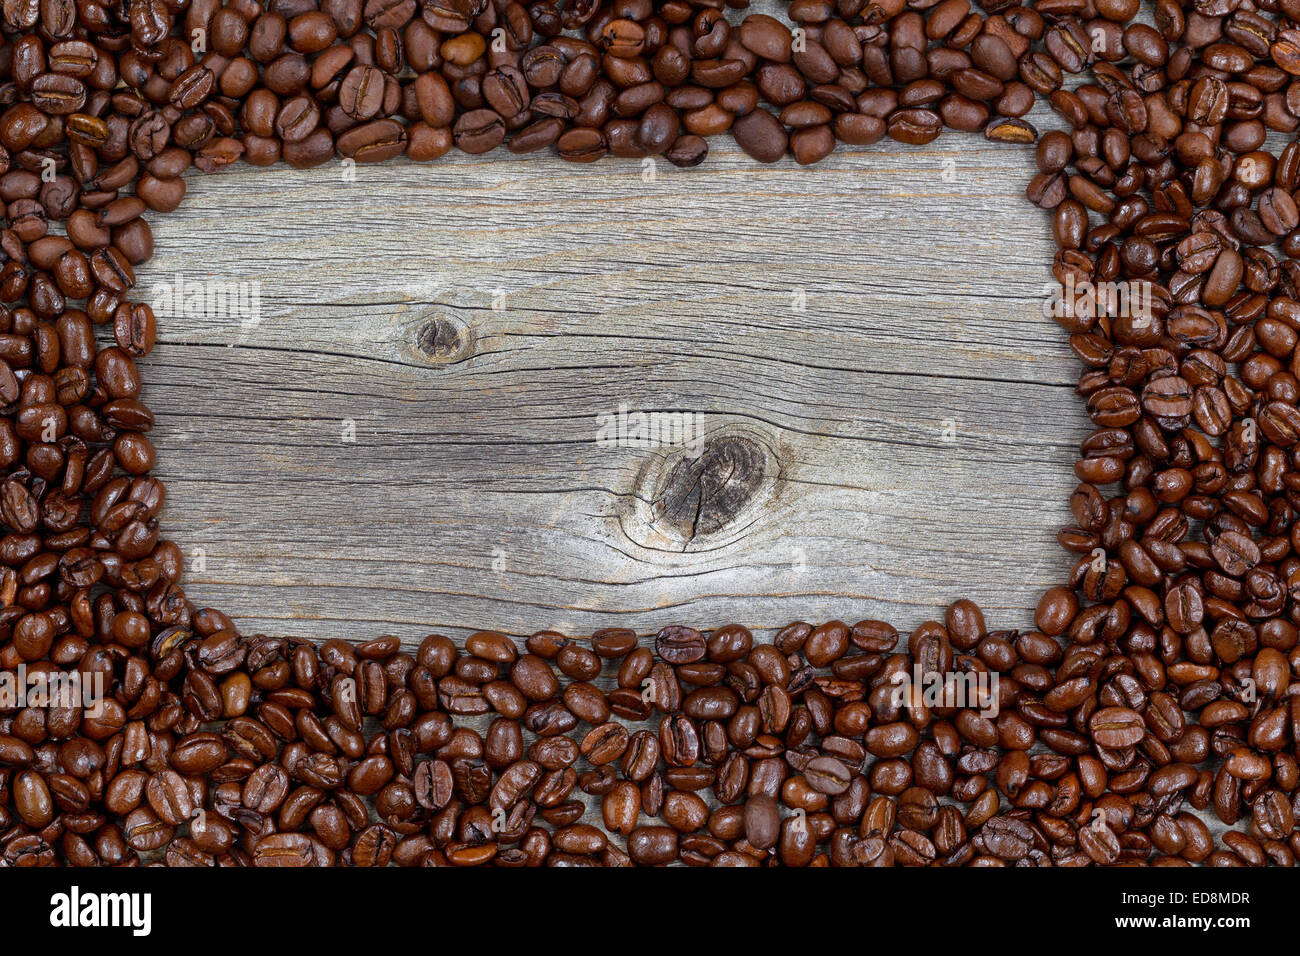 Close up of freshly roasted coffee whole beans, forming a rectangle shape, on rustic naturally aged wood Stock Photo